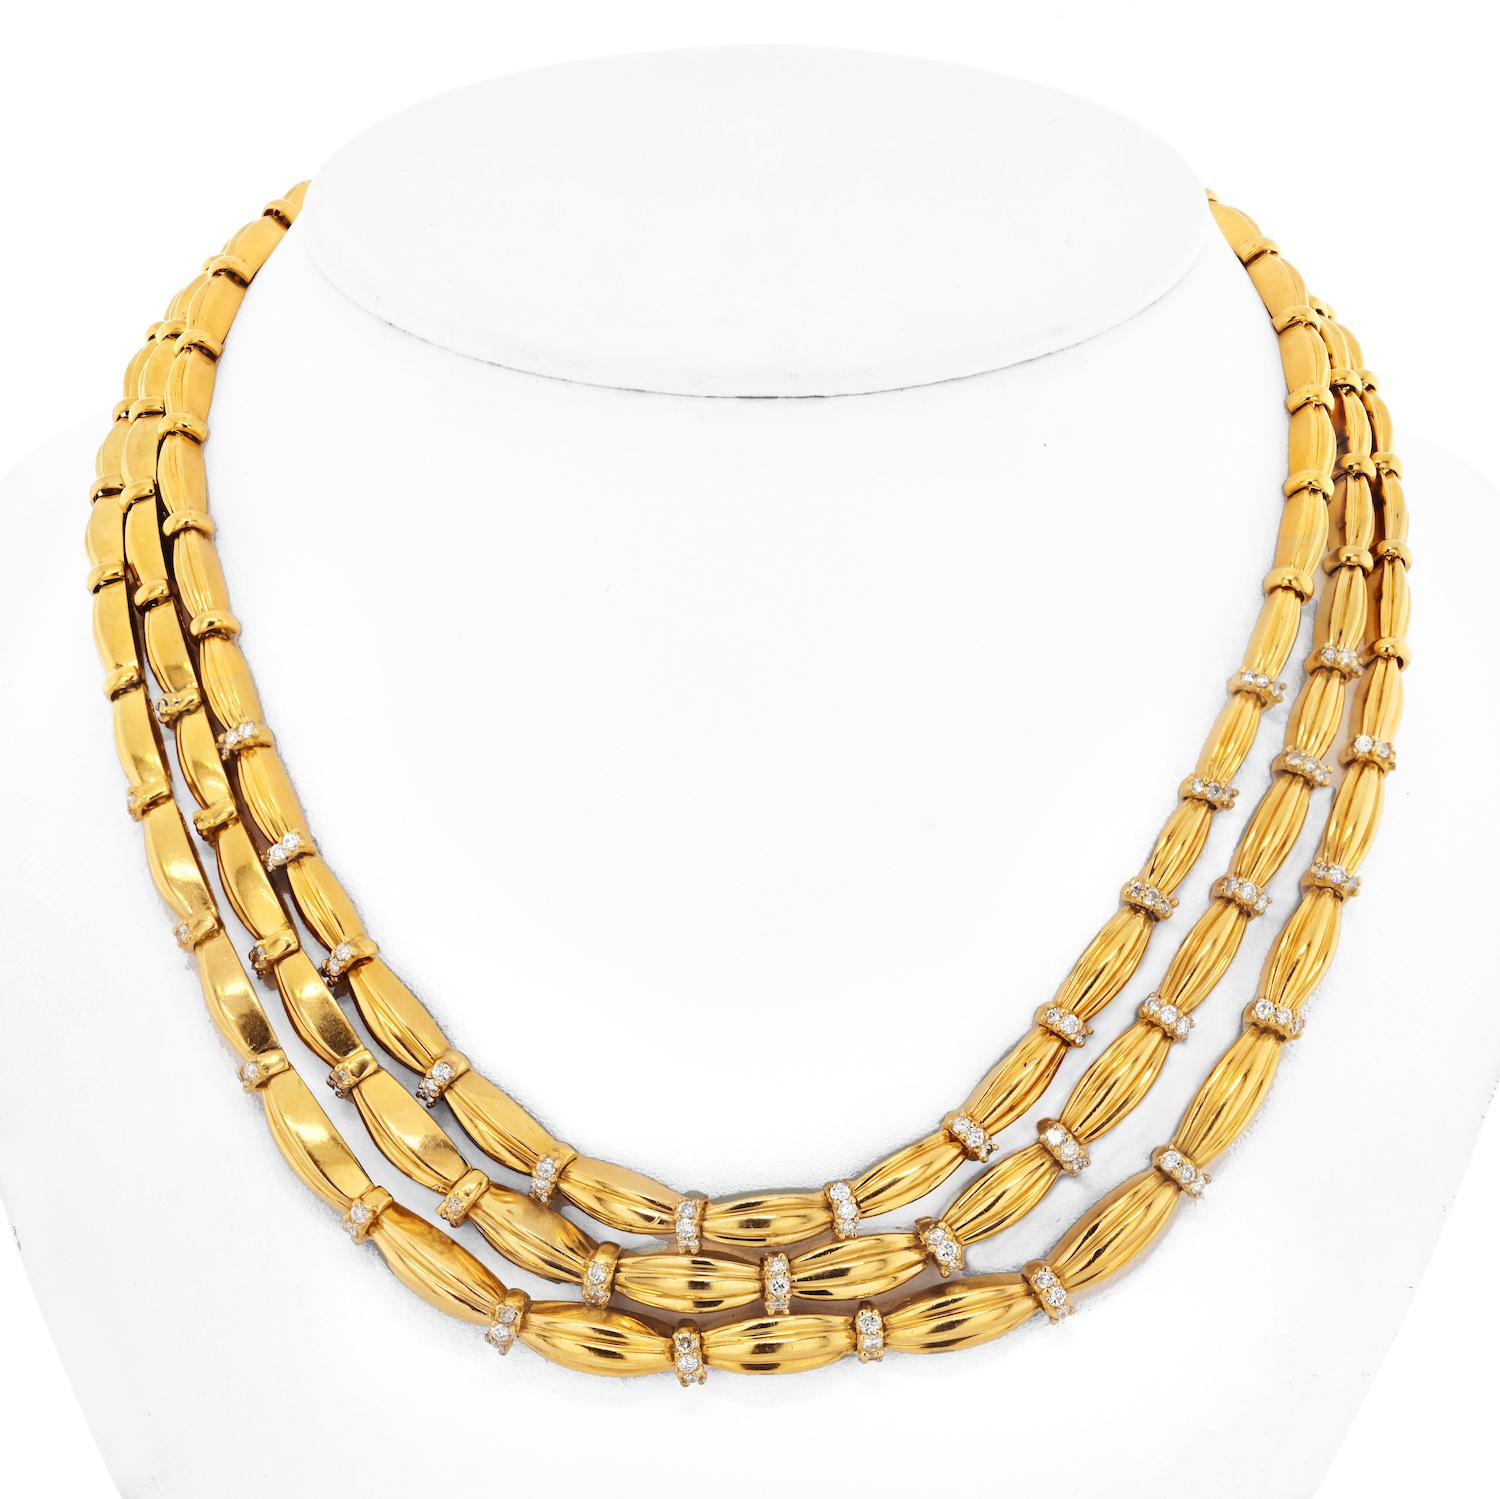 The 18k yellow gold vintage three strand Tiffany & Co necklace is a stunning piece of jewelry that exudes elegance and class. The necklace is designed as three strands of graduated fluted links, each link measuring approximately 10mm in size. The